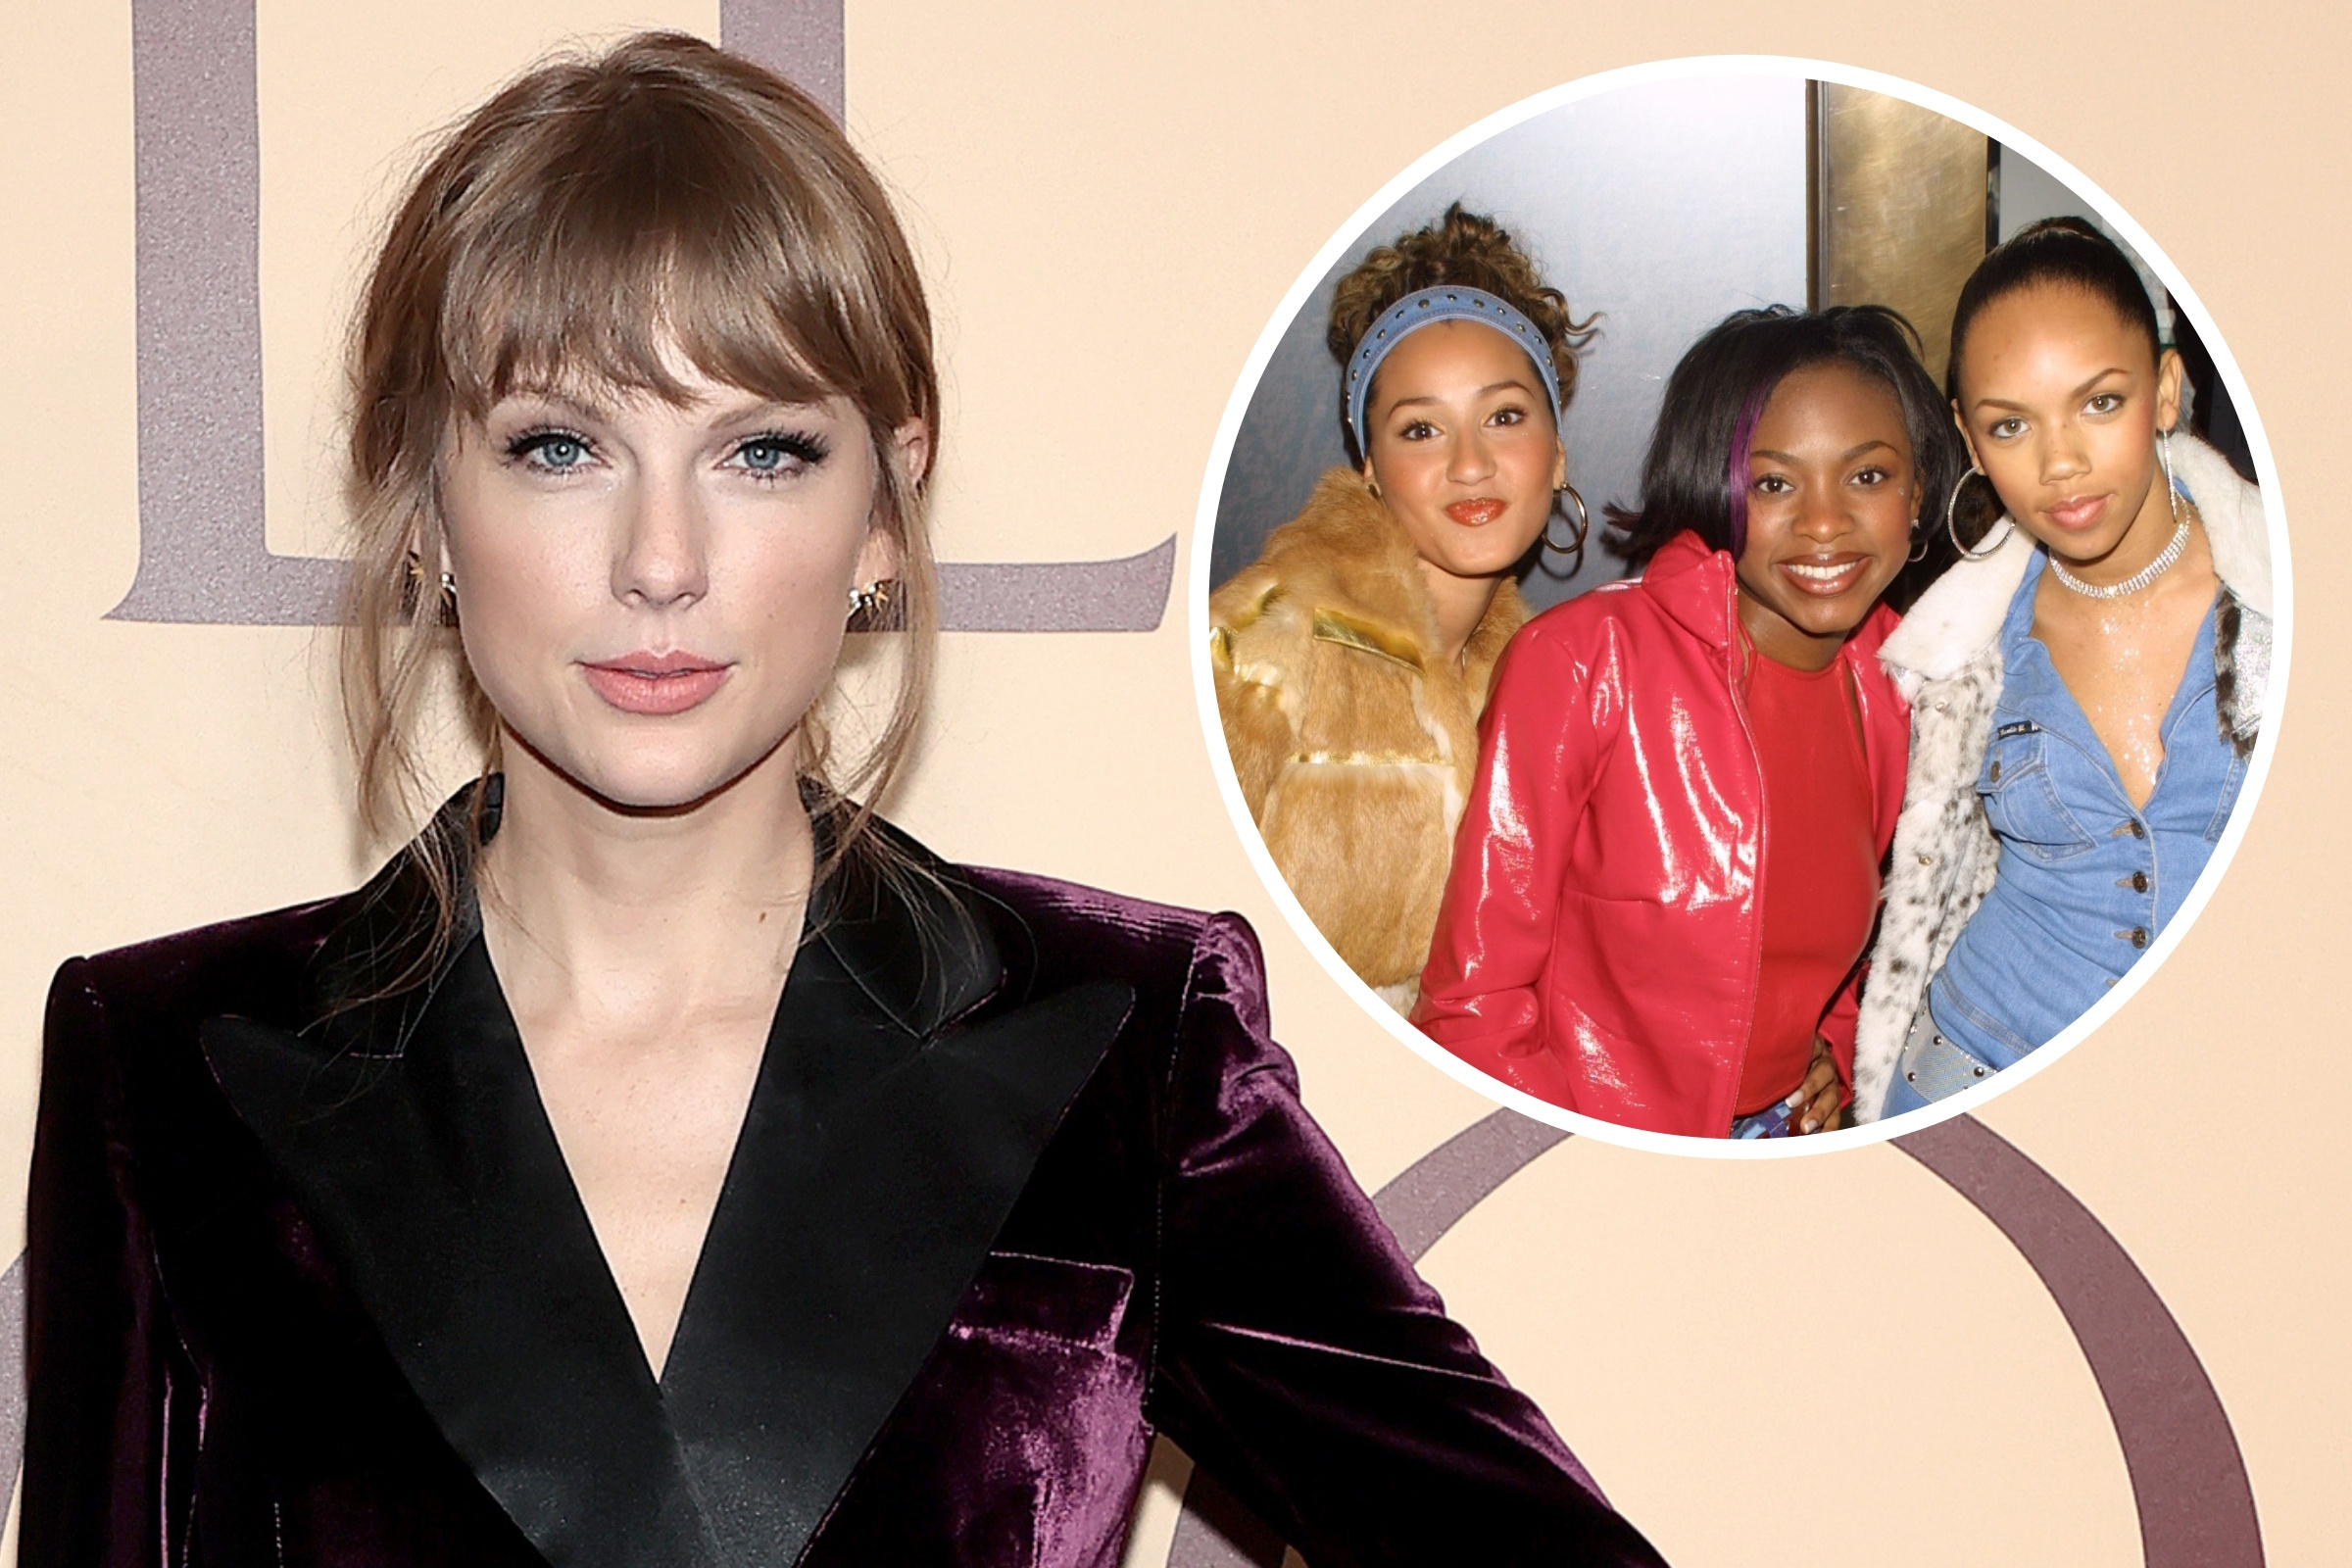 Taylor Swift Responds to 3LW's Haters Lawsuit